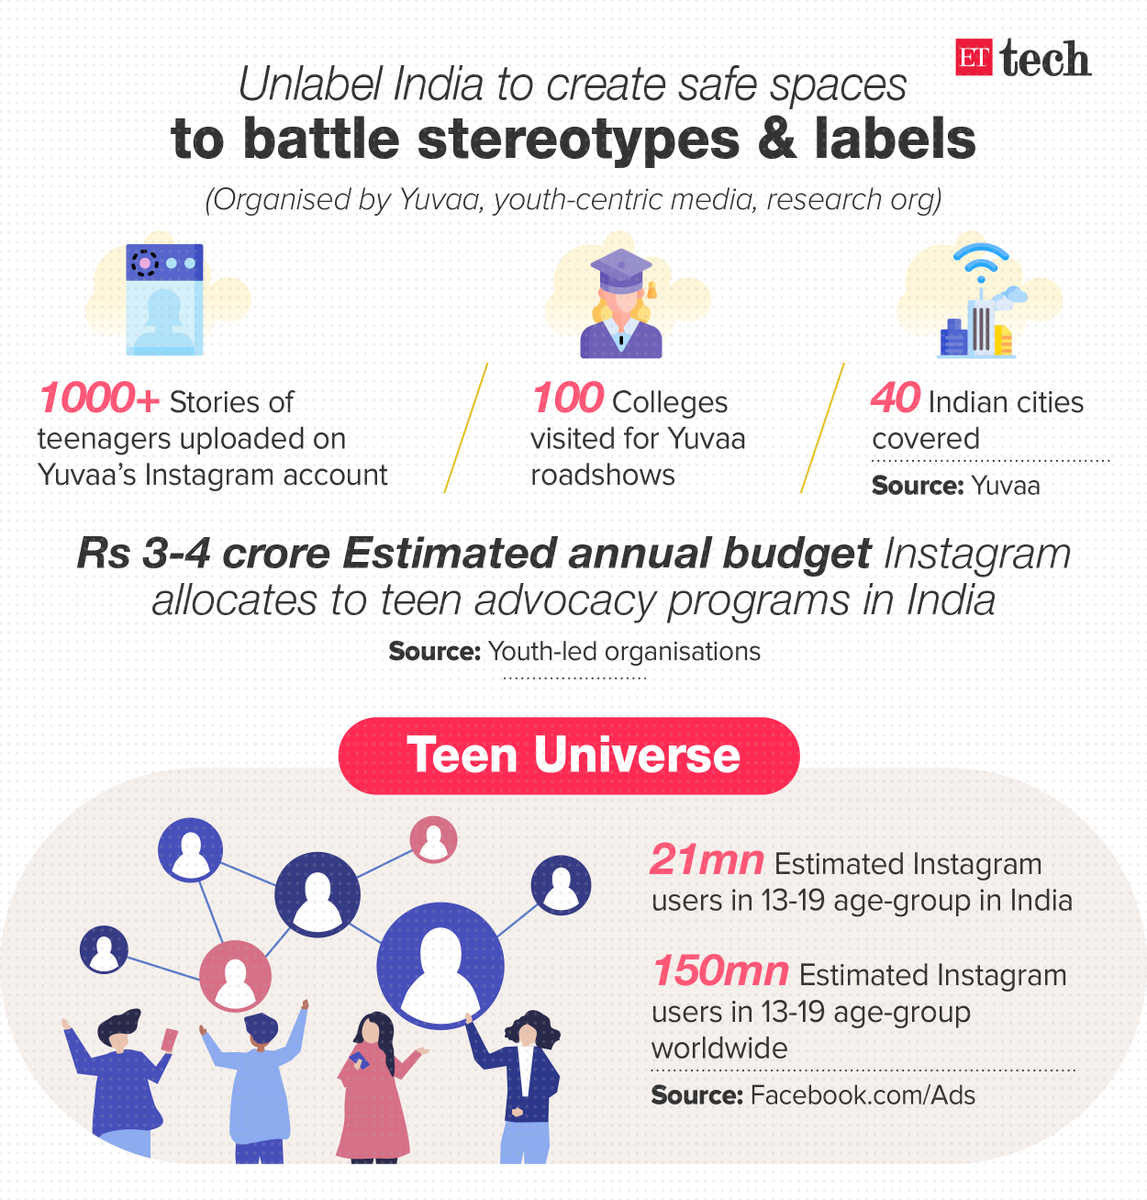 How? By giving them tools like ad budgets to amplify their content’s reach, tutoring on hashtags, on the art of tagging, and most importantly, preparing them to deal with trolls and hate-mongers online. https://tech.economictimes.indiatimes.com/news/internet/inside-instagrams-teen-training-camp-for-positive-advocacy/76803173